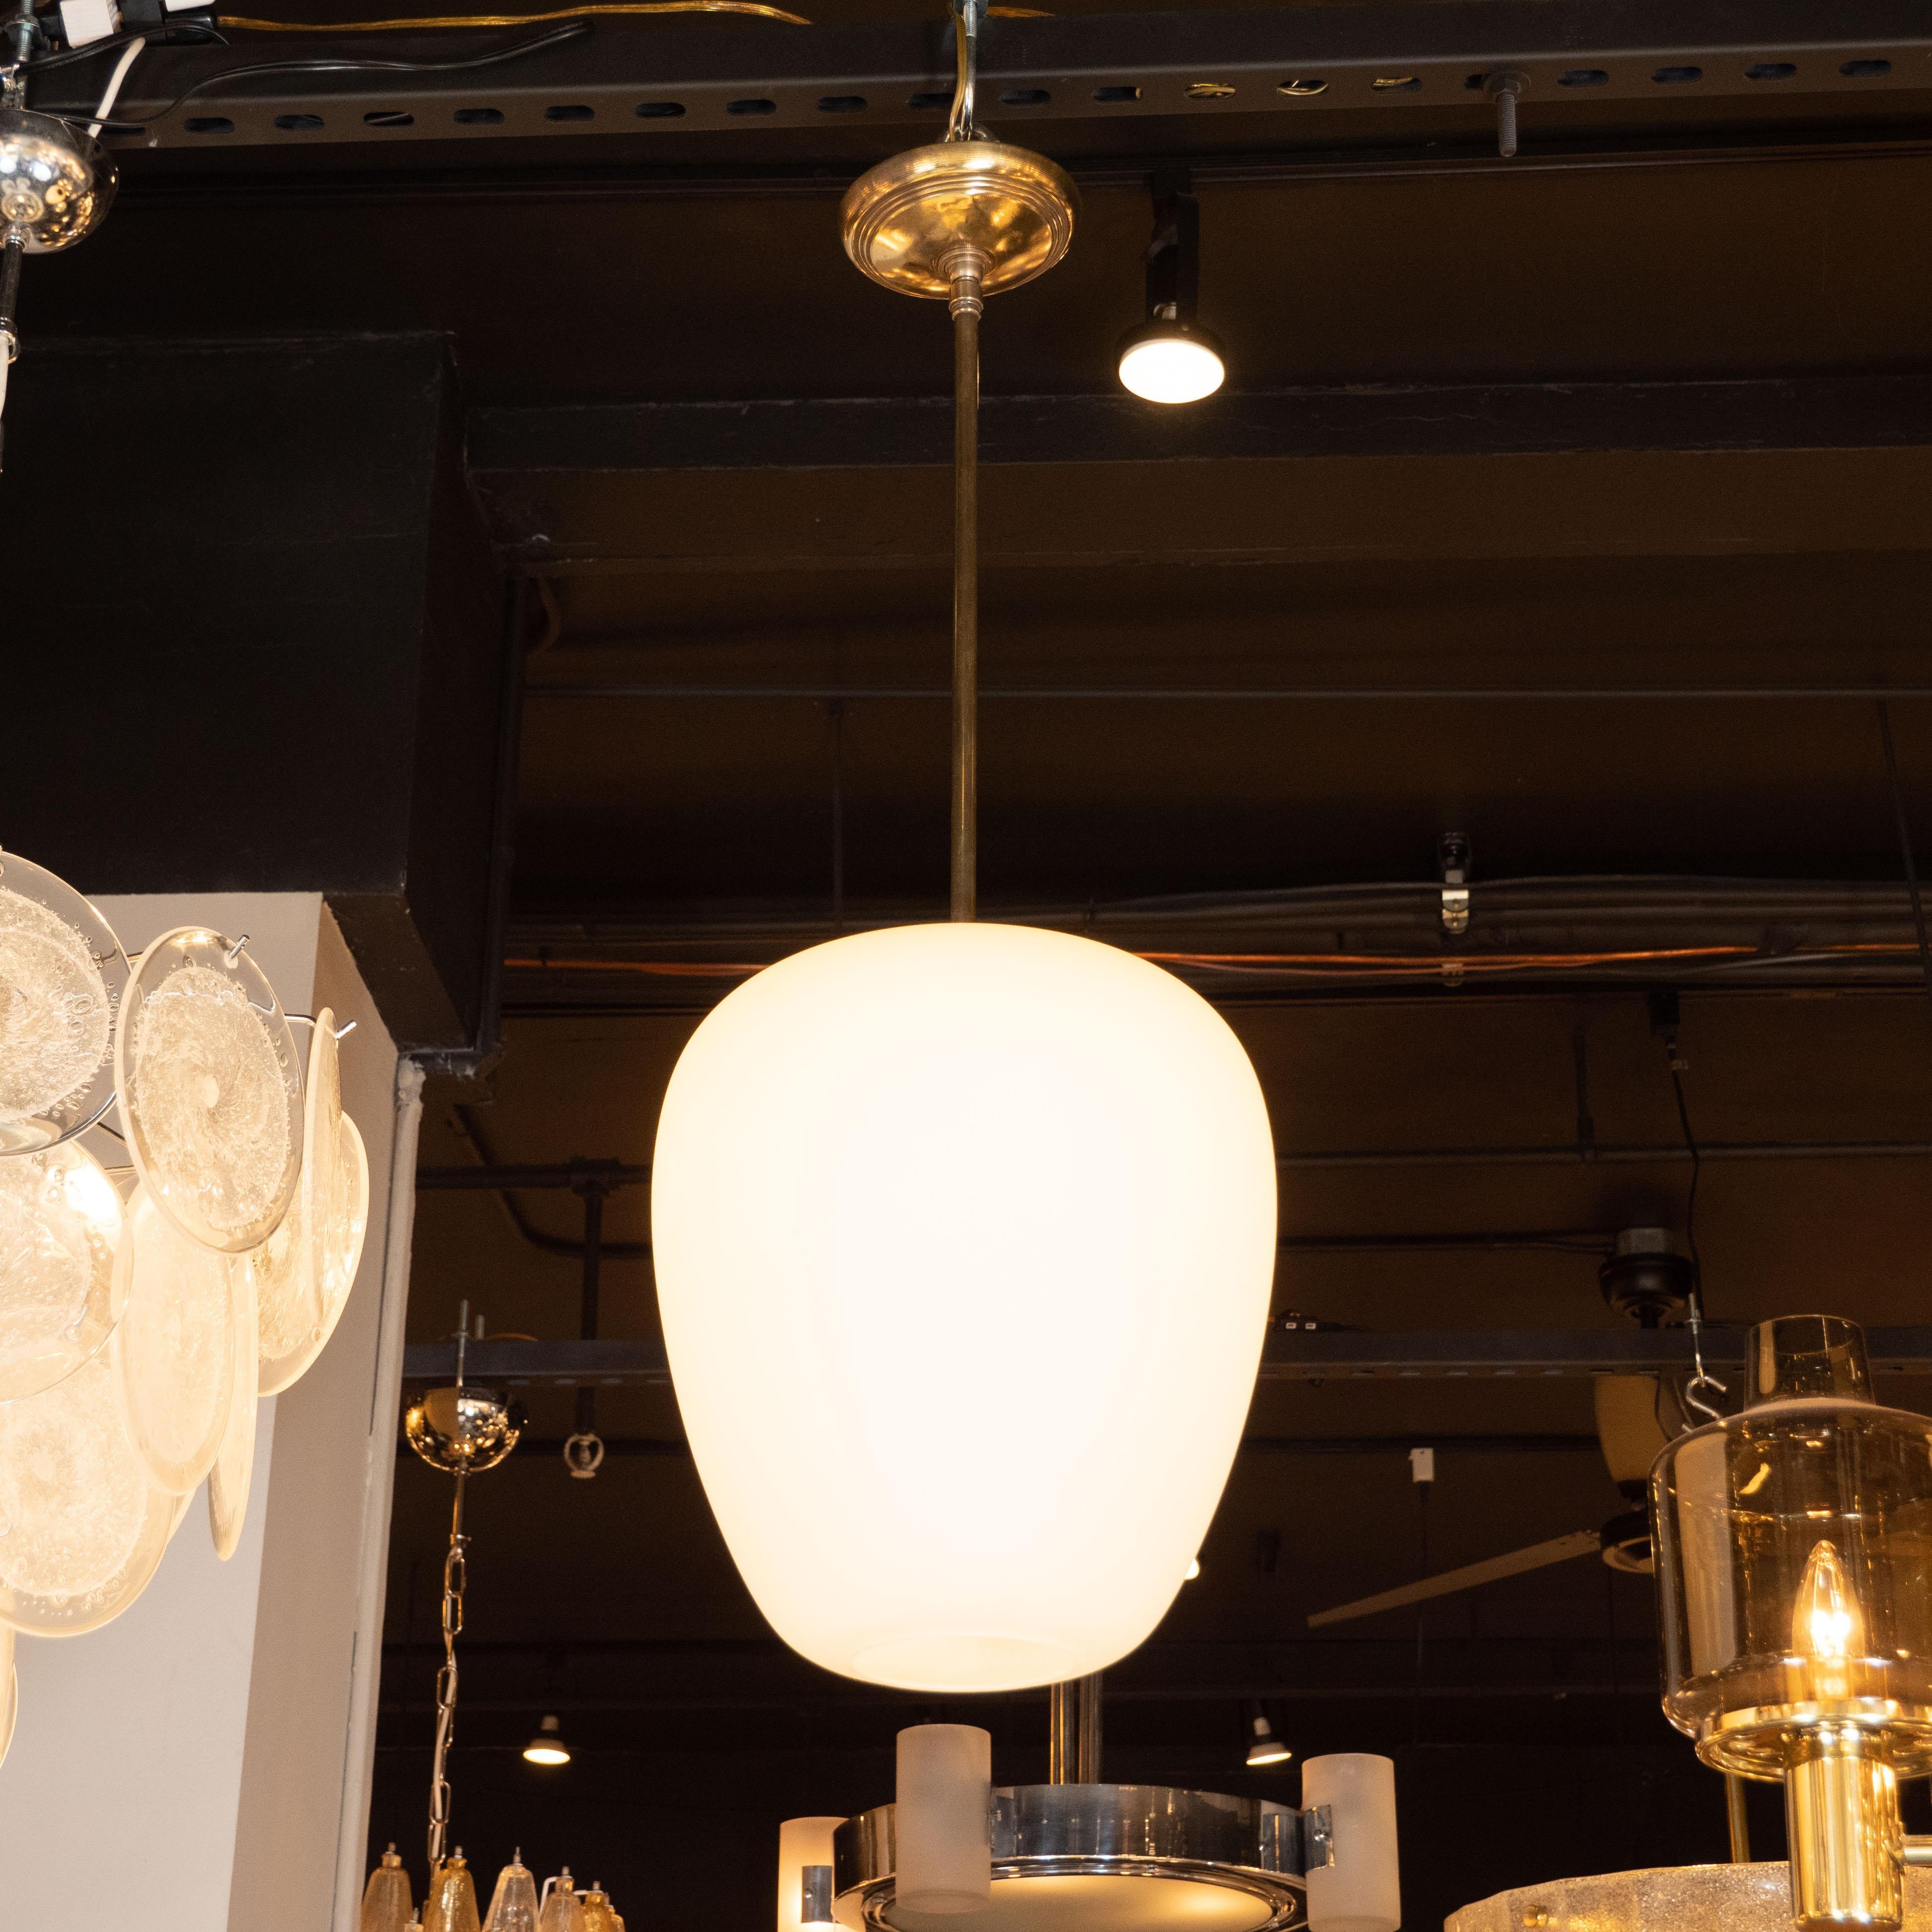 This elegant Mid-Century Modern pendant was realized in Italy, circa 1960. It features a gently tapered conical body with rounded shoulders in frosted glass suspended from a circular brass canopy via a cylindrical rod in the same material. With its